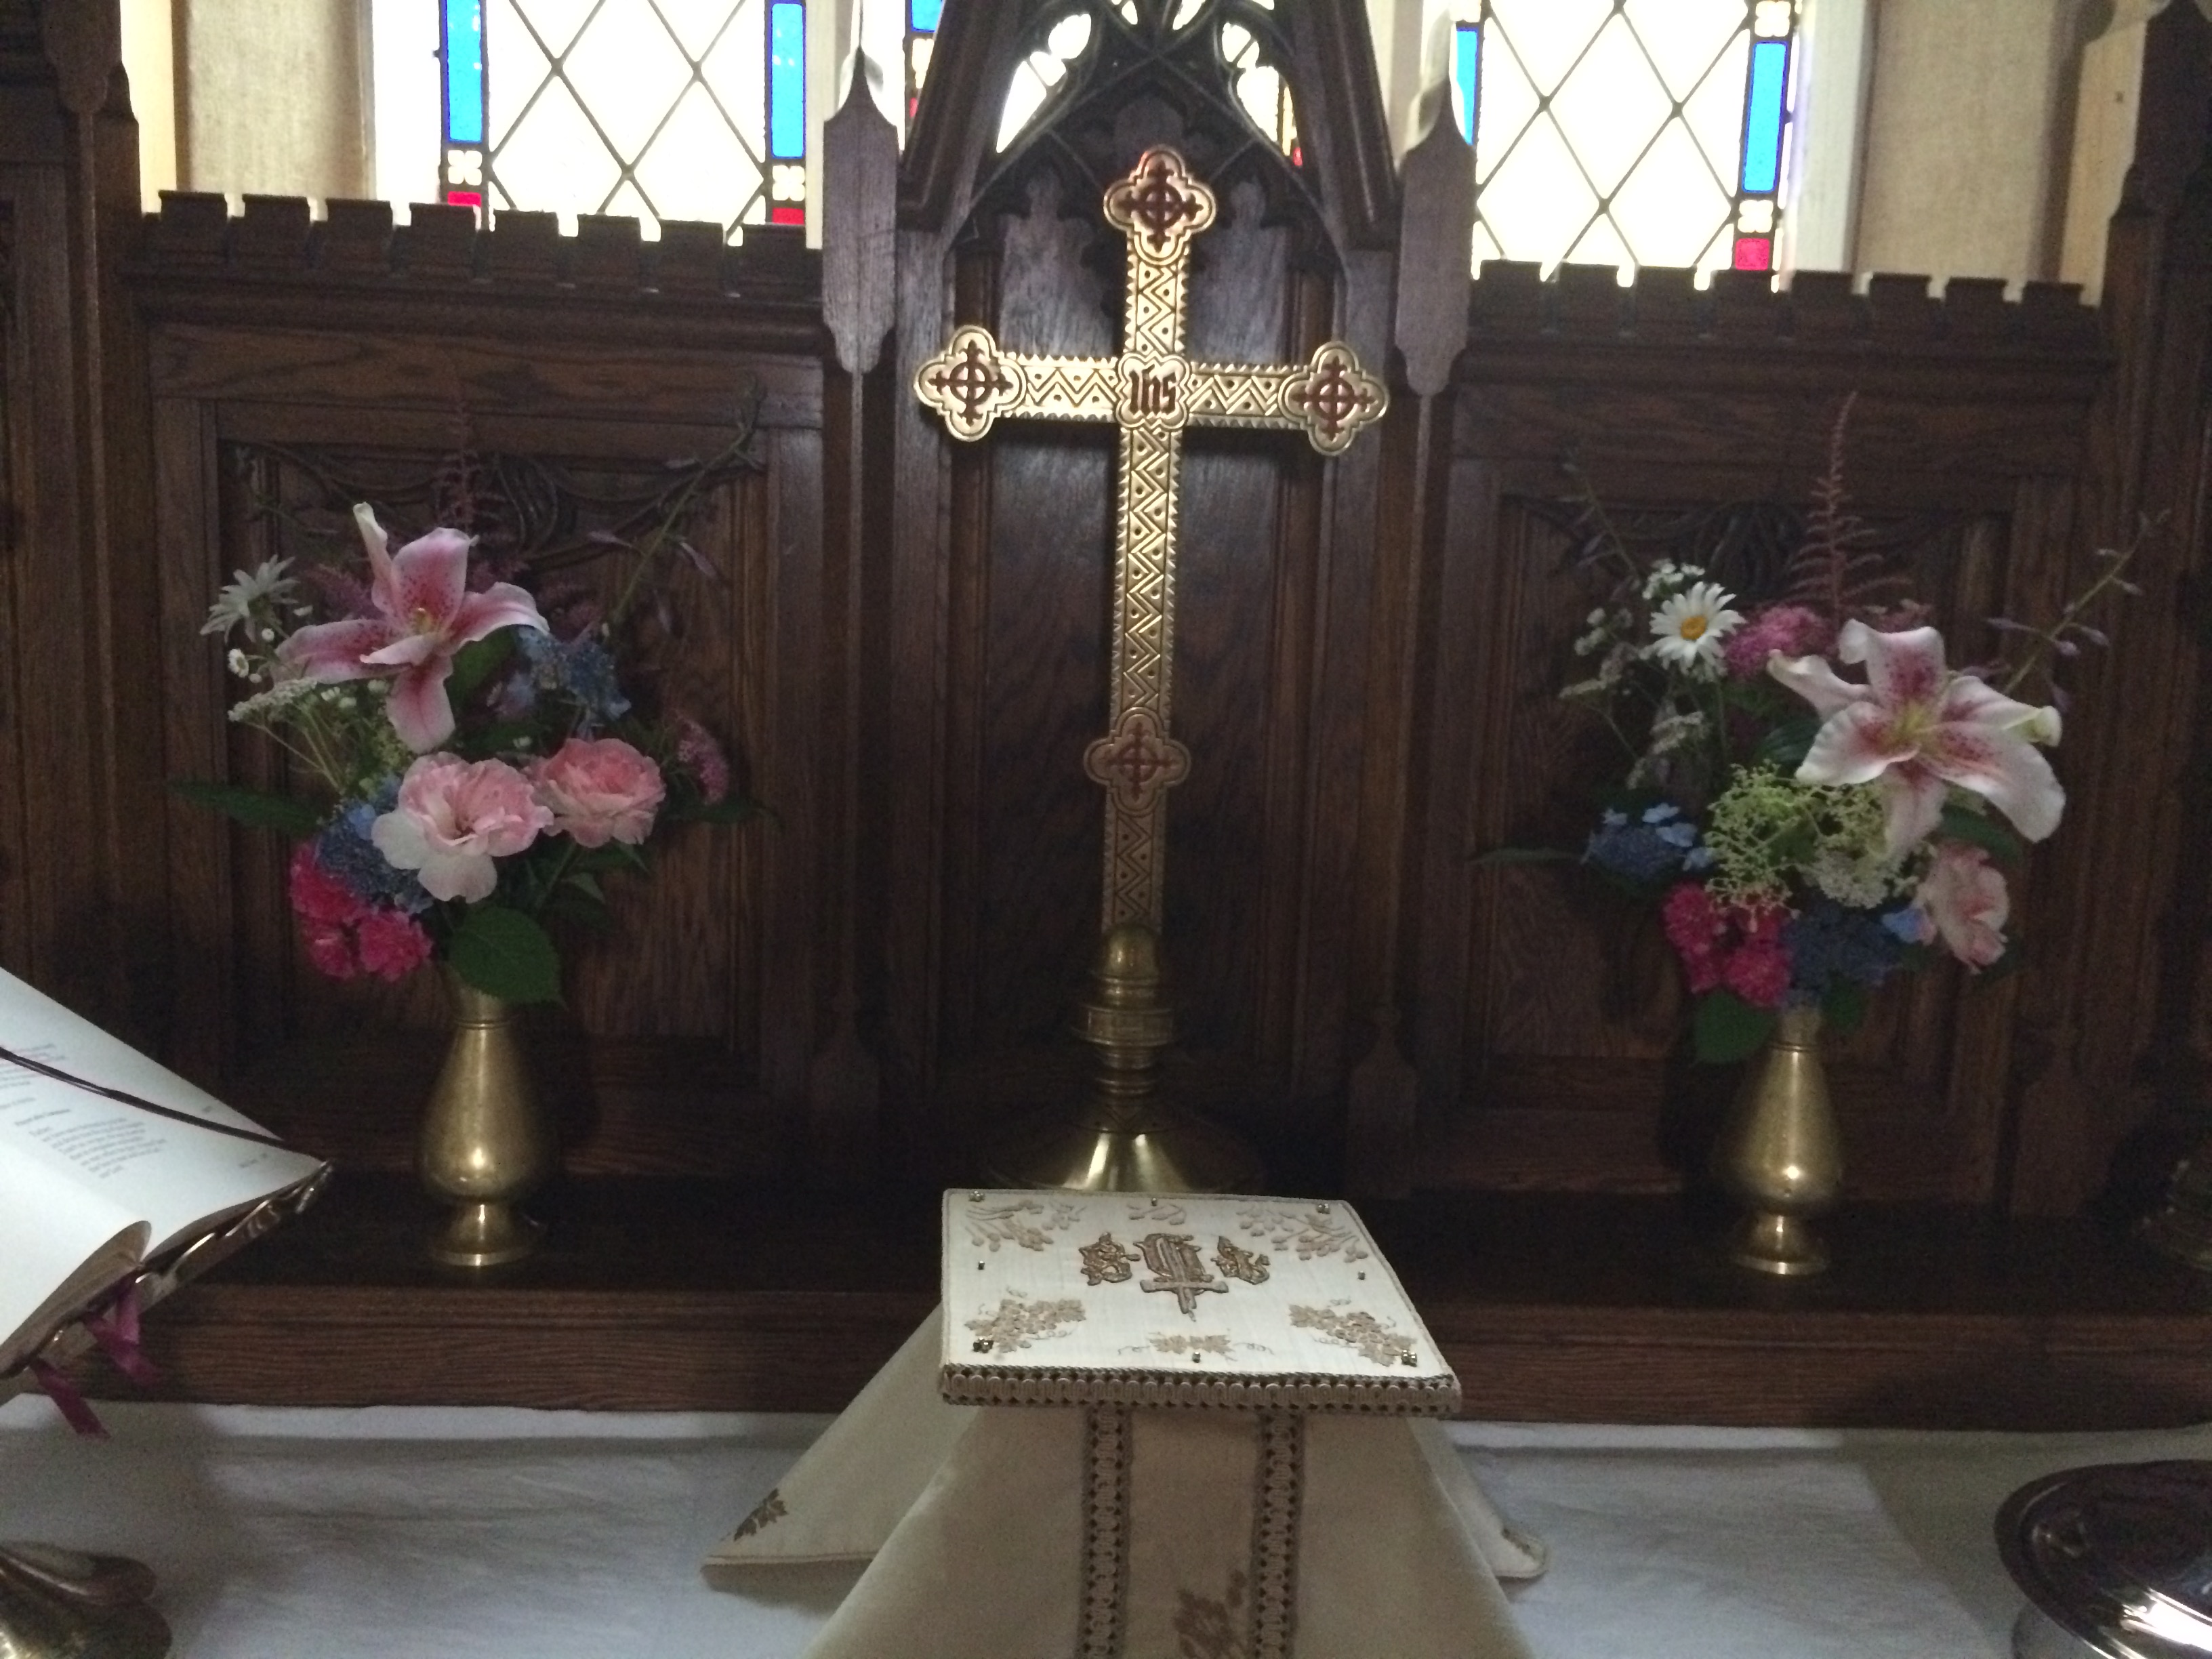 Sunday, July 24th at St. Luke's: Flowers on the Altar.